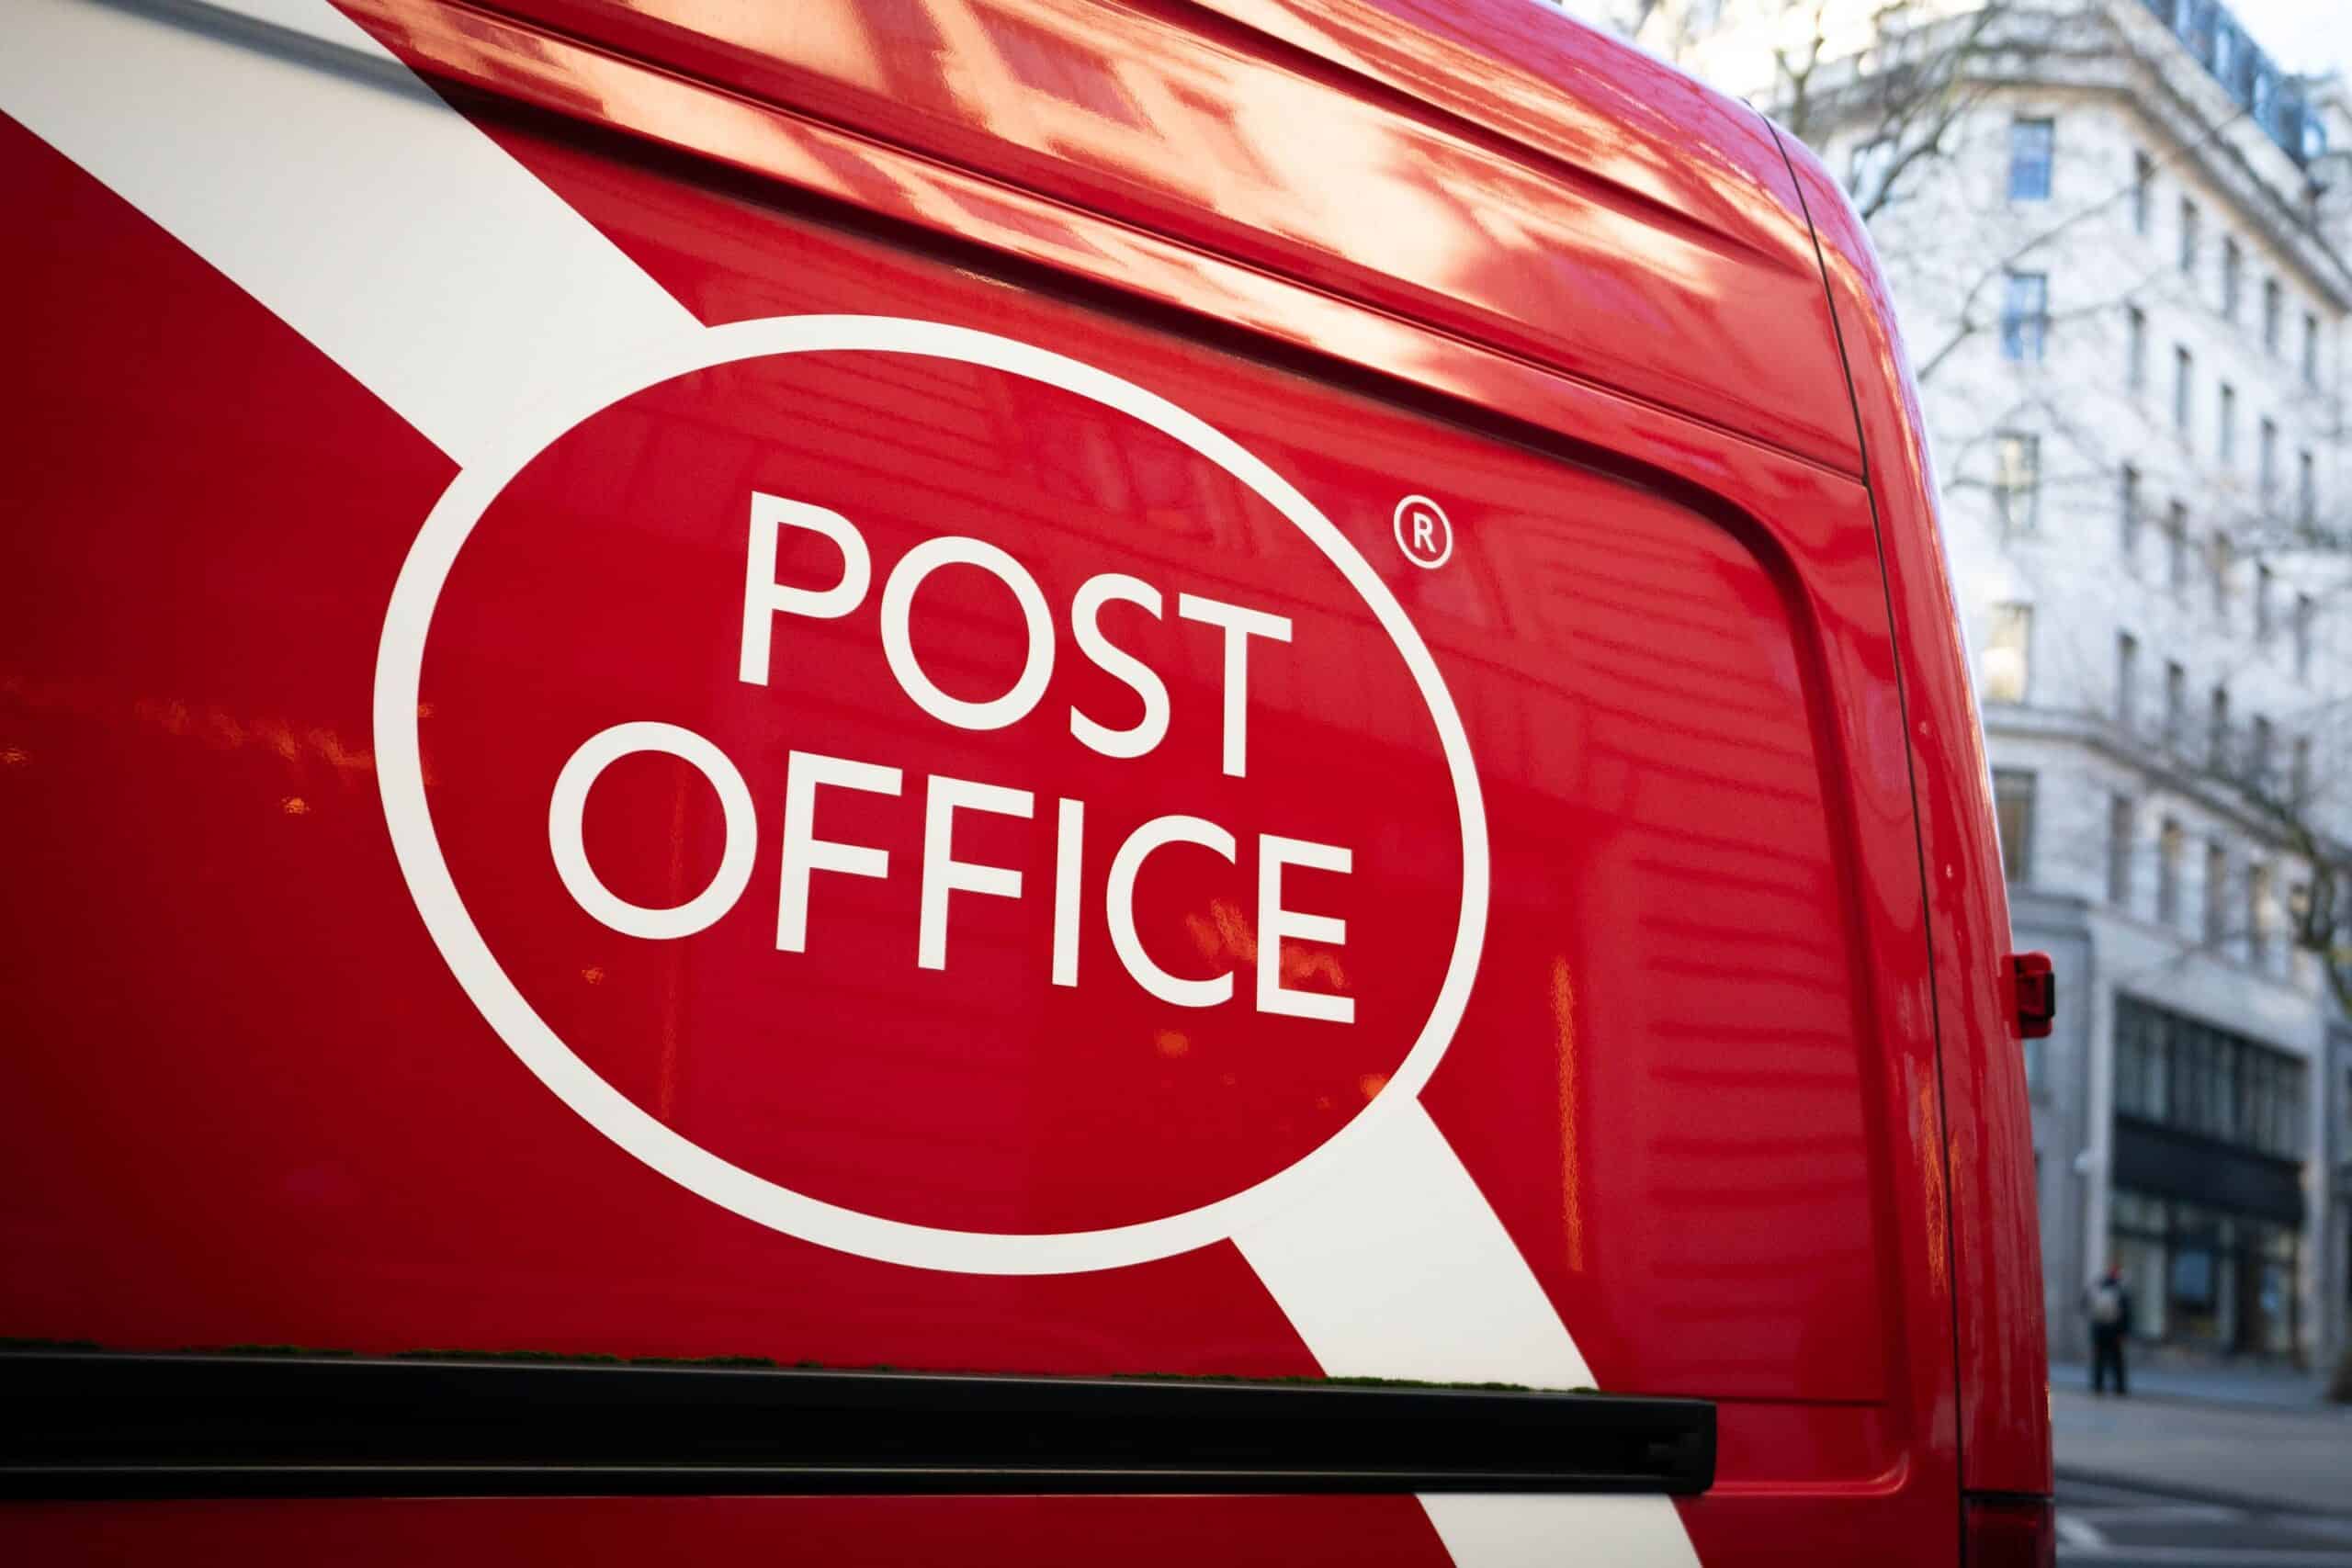 MP warns of potential ‘second scandal’ over ‘faulty’ Post Office IT system